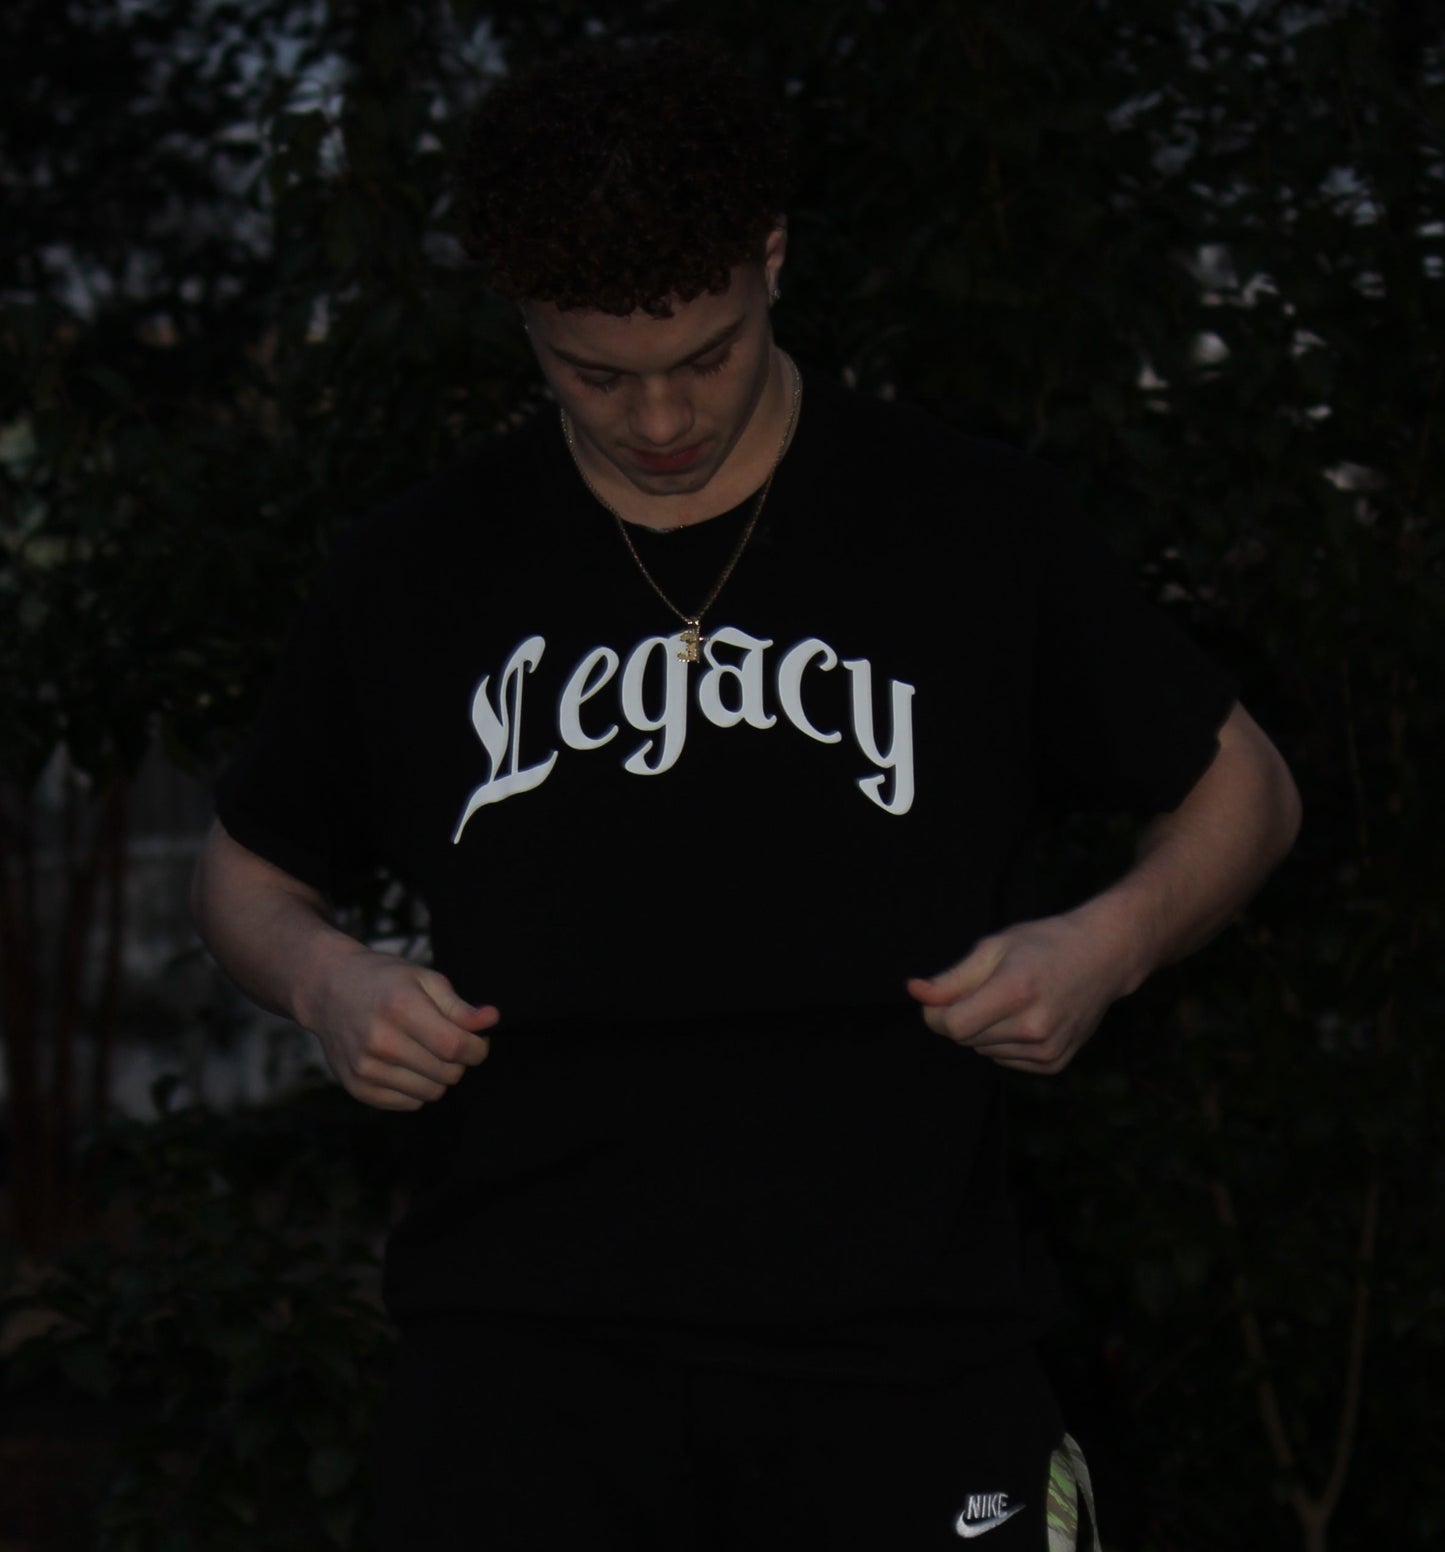 Legacy Signature Short Sleeve T-Shirt Arch Design (All Colors)